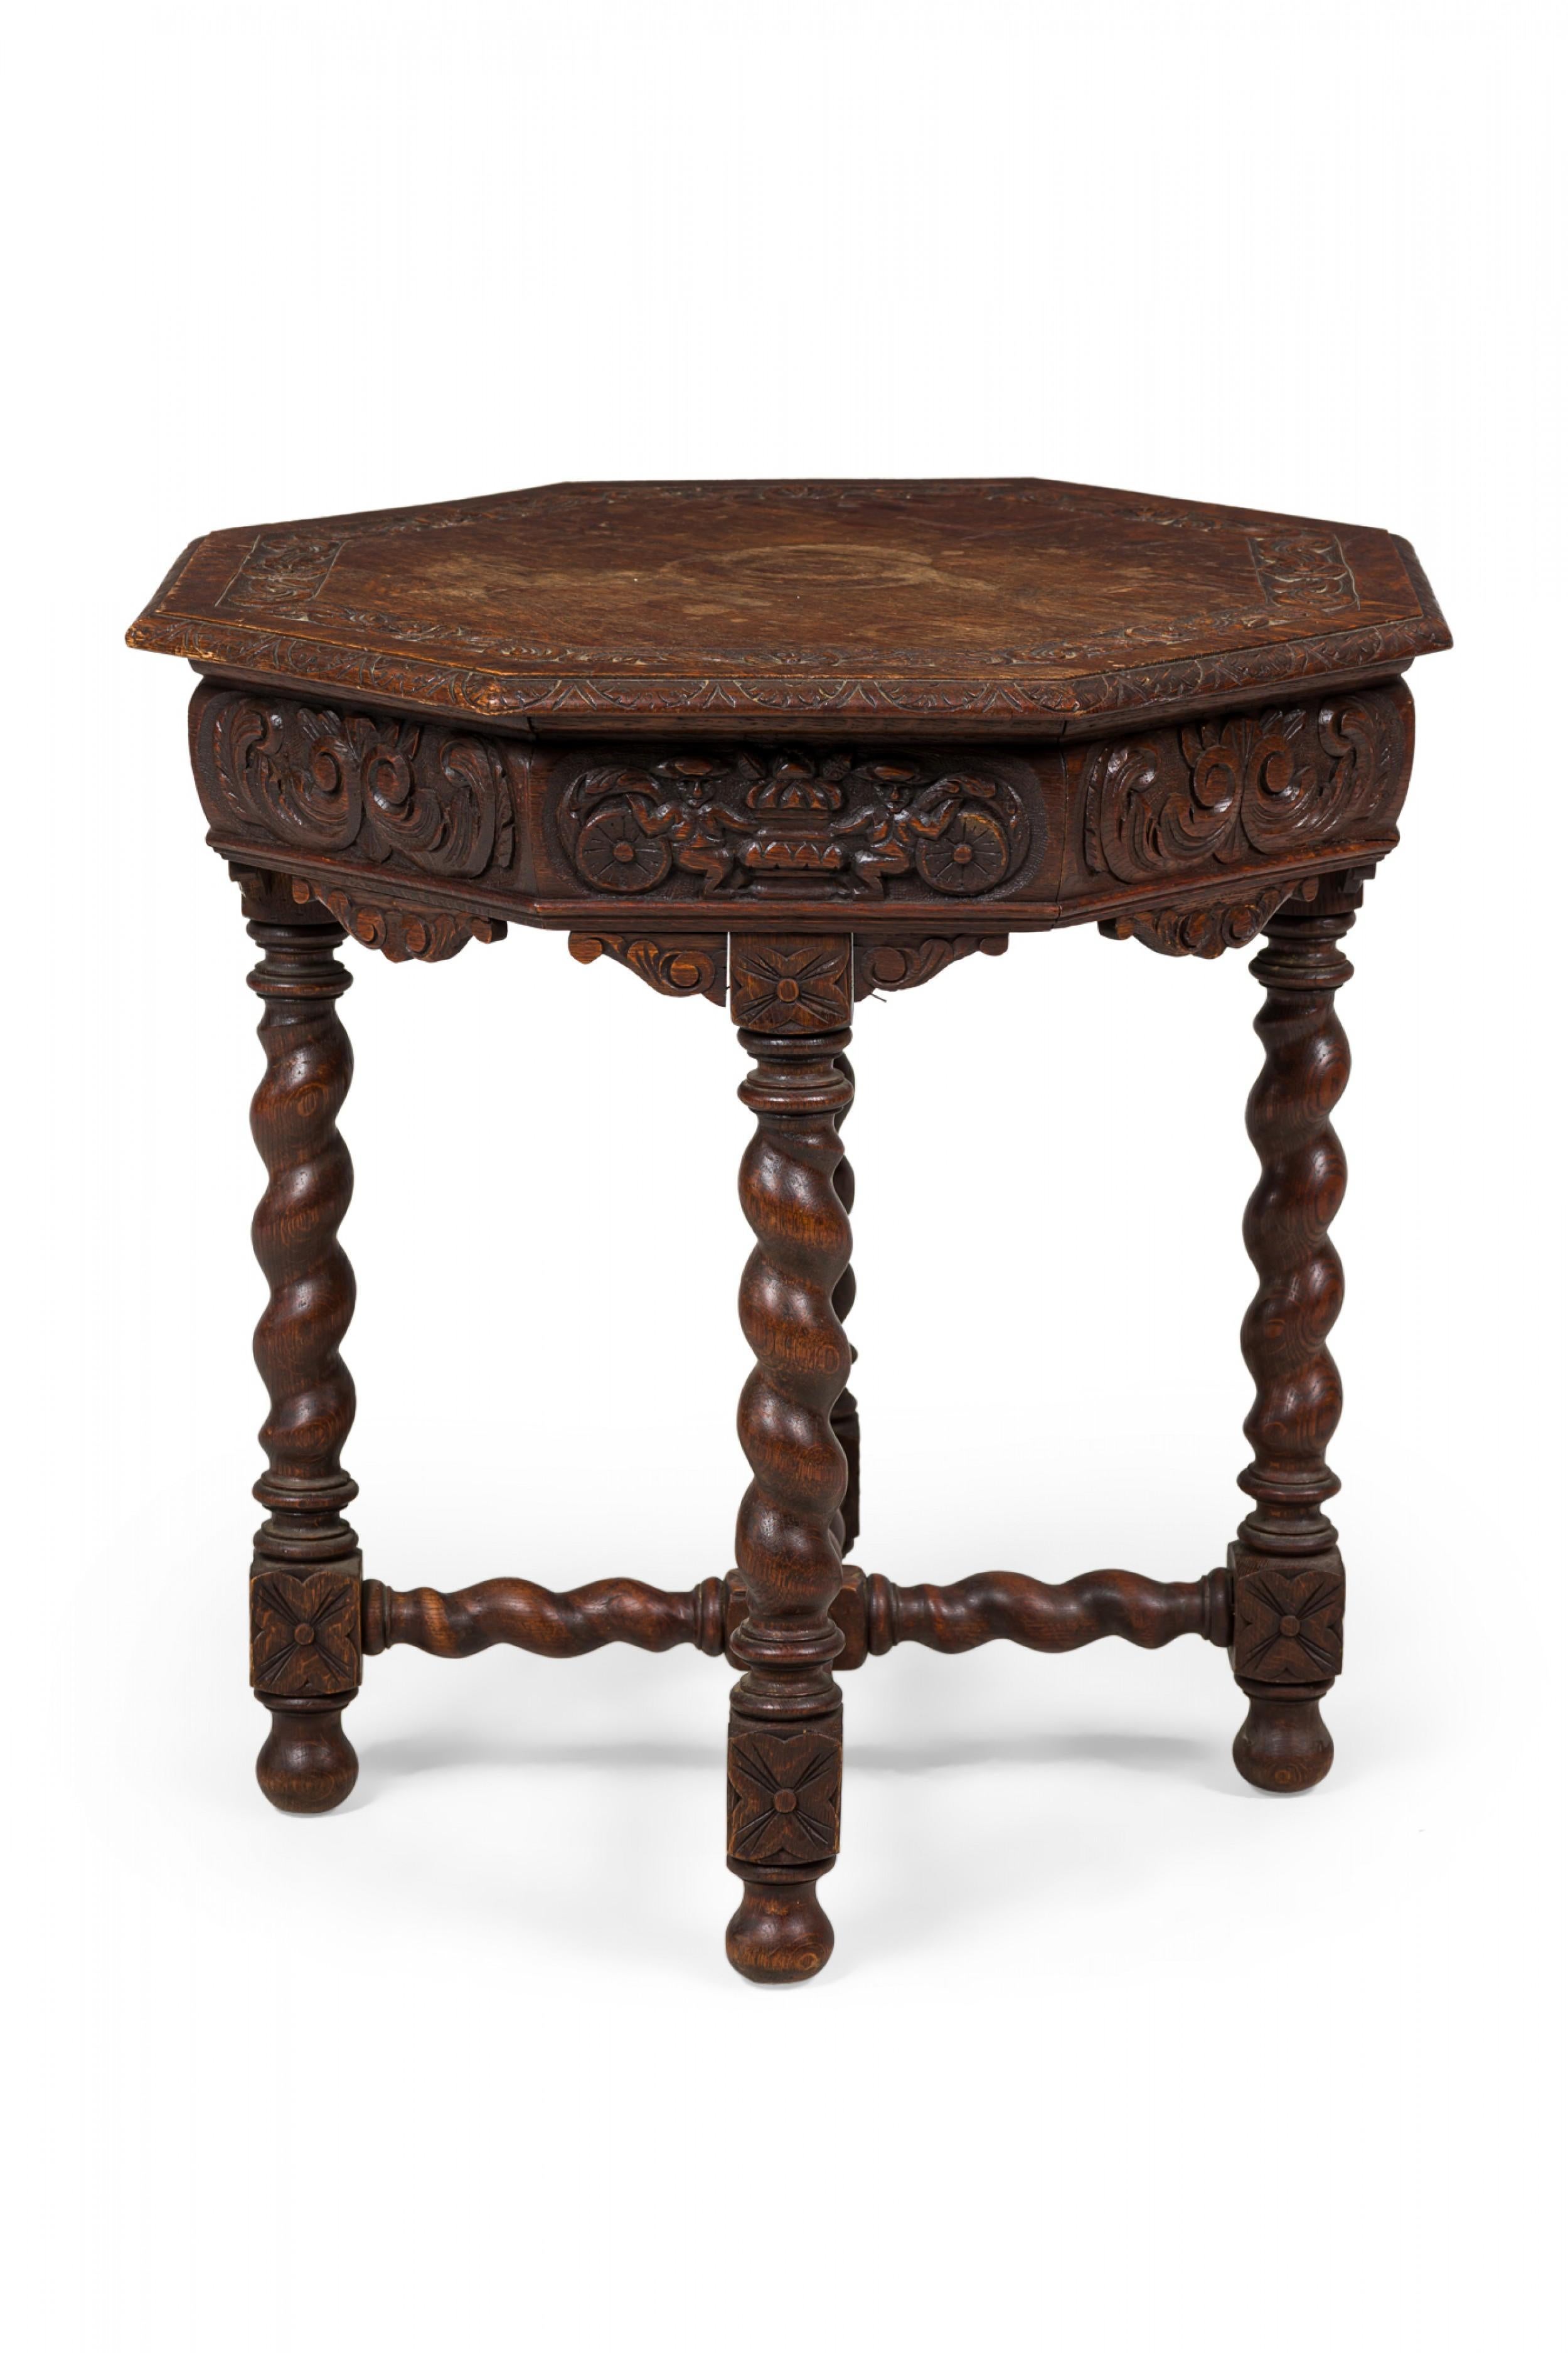 Unknown English Jacobean-Style Carved Spiral Turned Leg Octagonal Occasional/Side Table For Sale